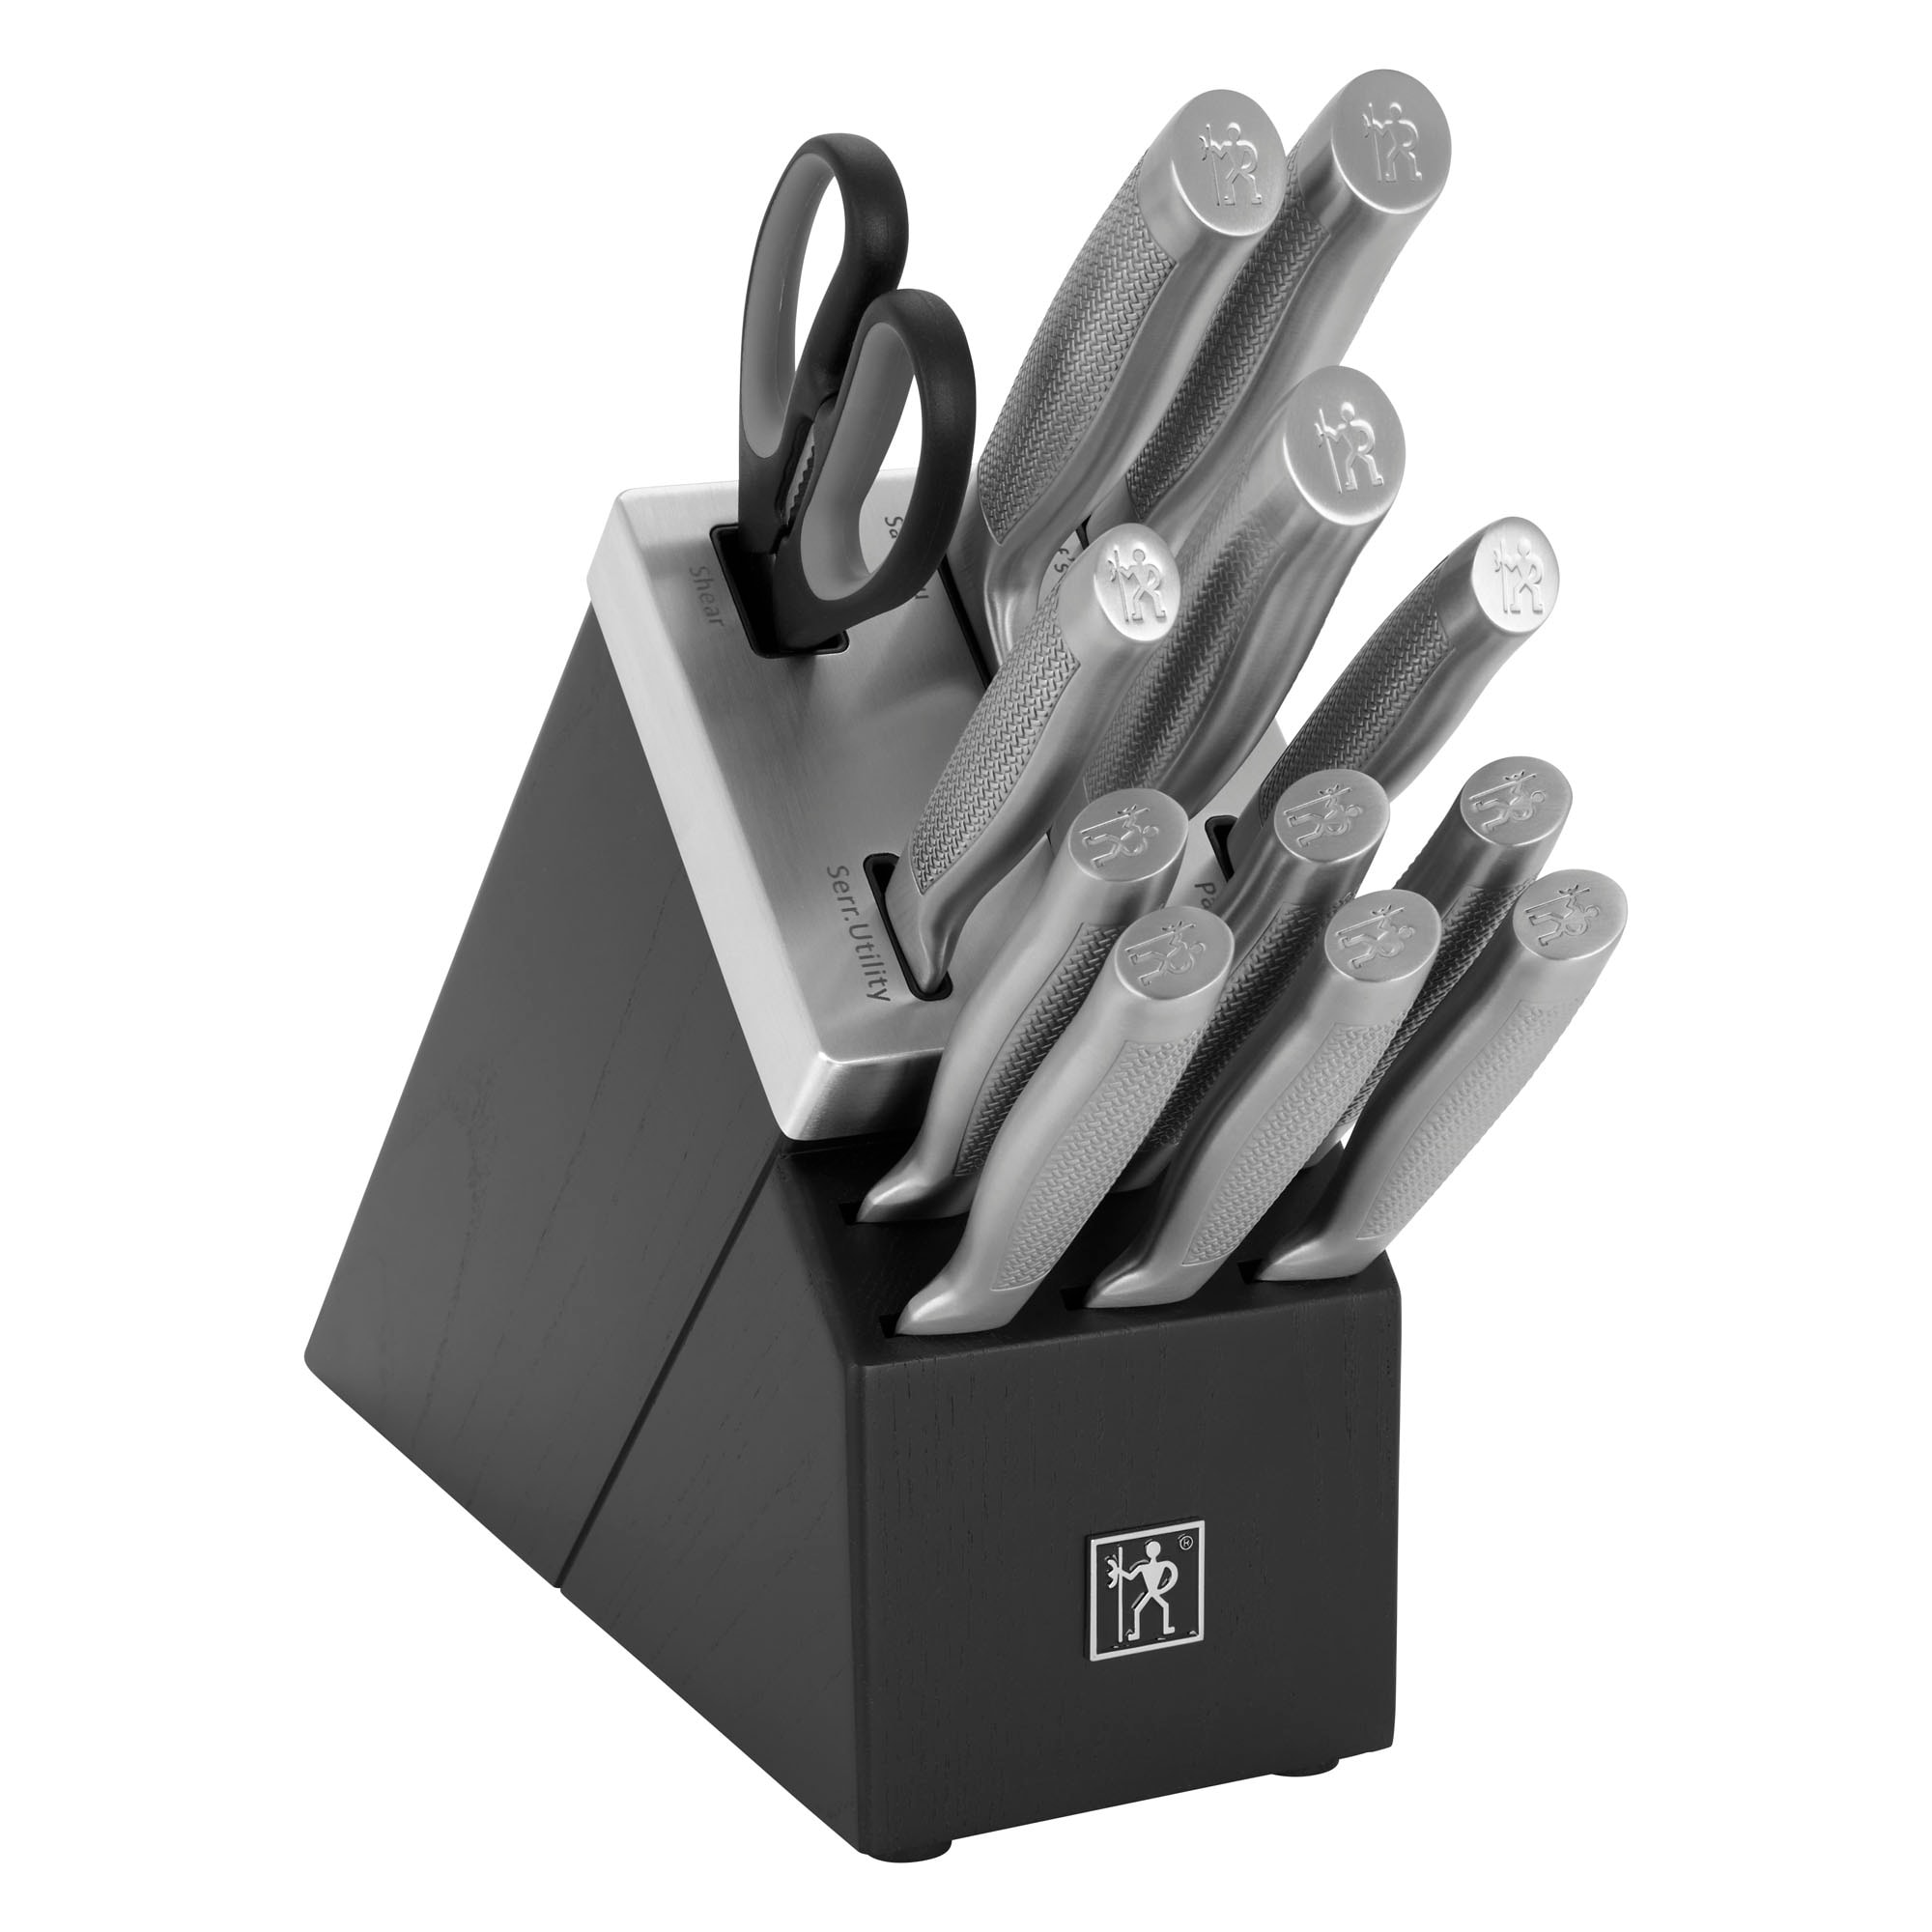 https://ak1.ostkcdn.com/images/products/is/images/direct/c04e394bbe84e1cab4fcfca86aa4f2bc6cb9738a/Henckels-Diamond-13-pc-Self-Sharpening-Knife-Block-Set.jpg